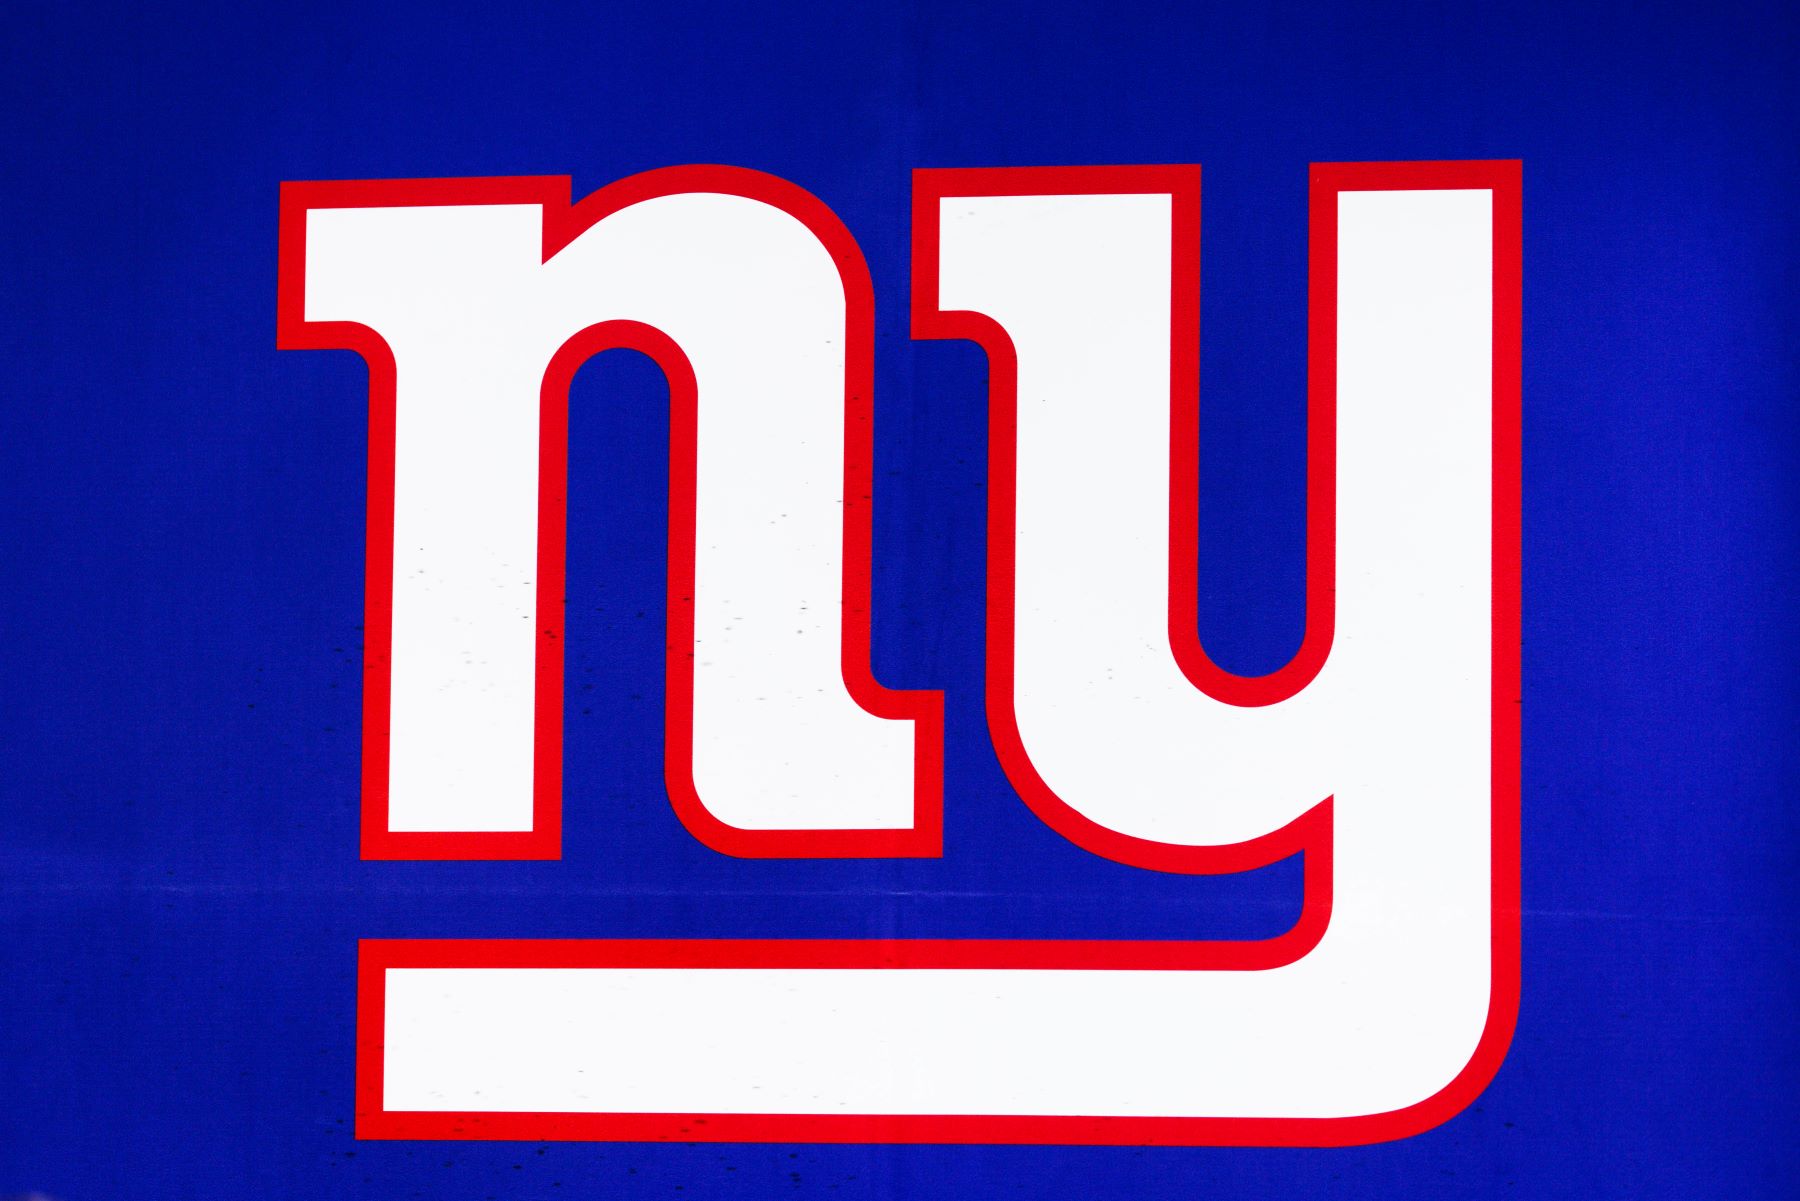 New York Giants logo seen at the Los Angeles Convention Center during the Super Bowl Experience